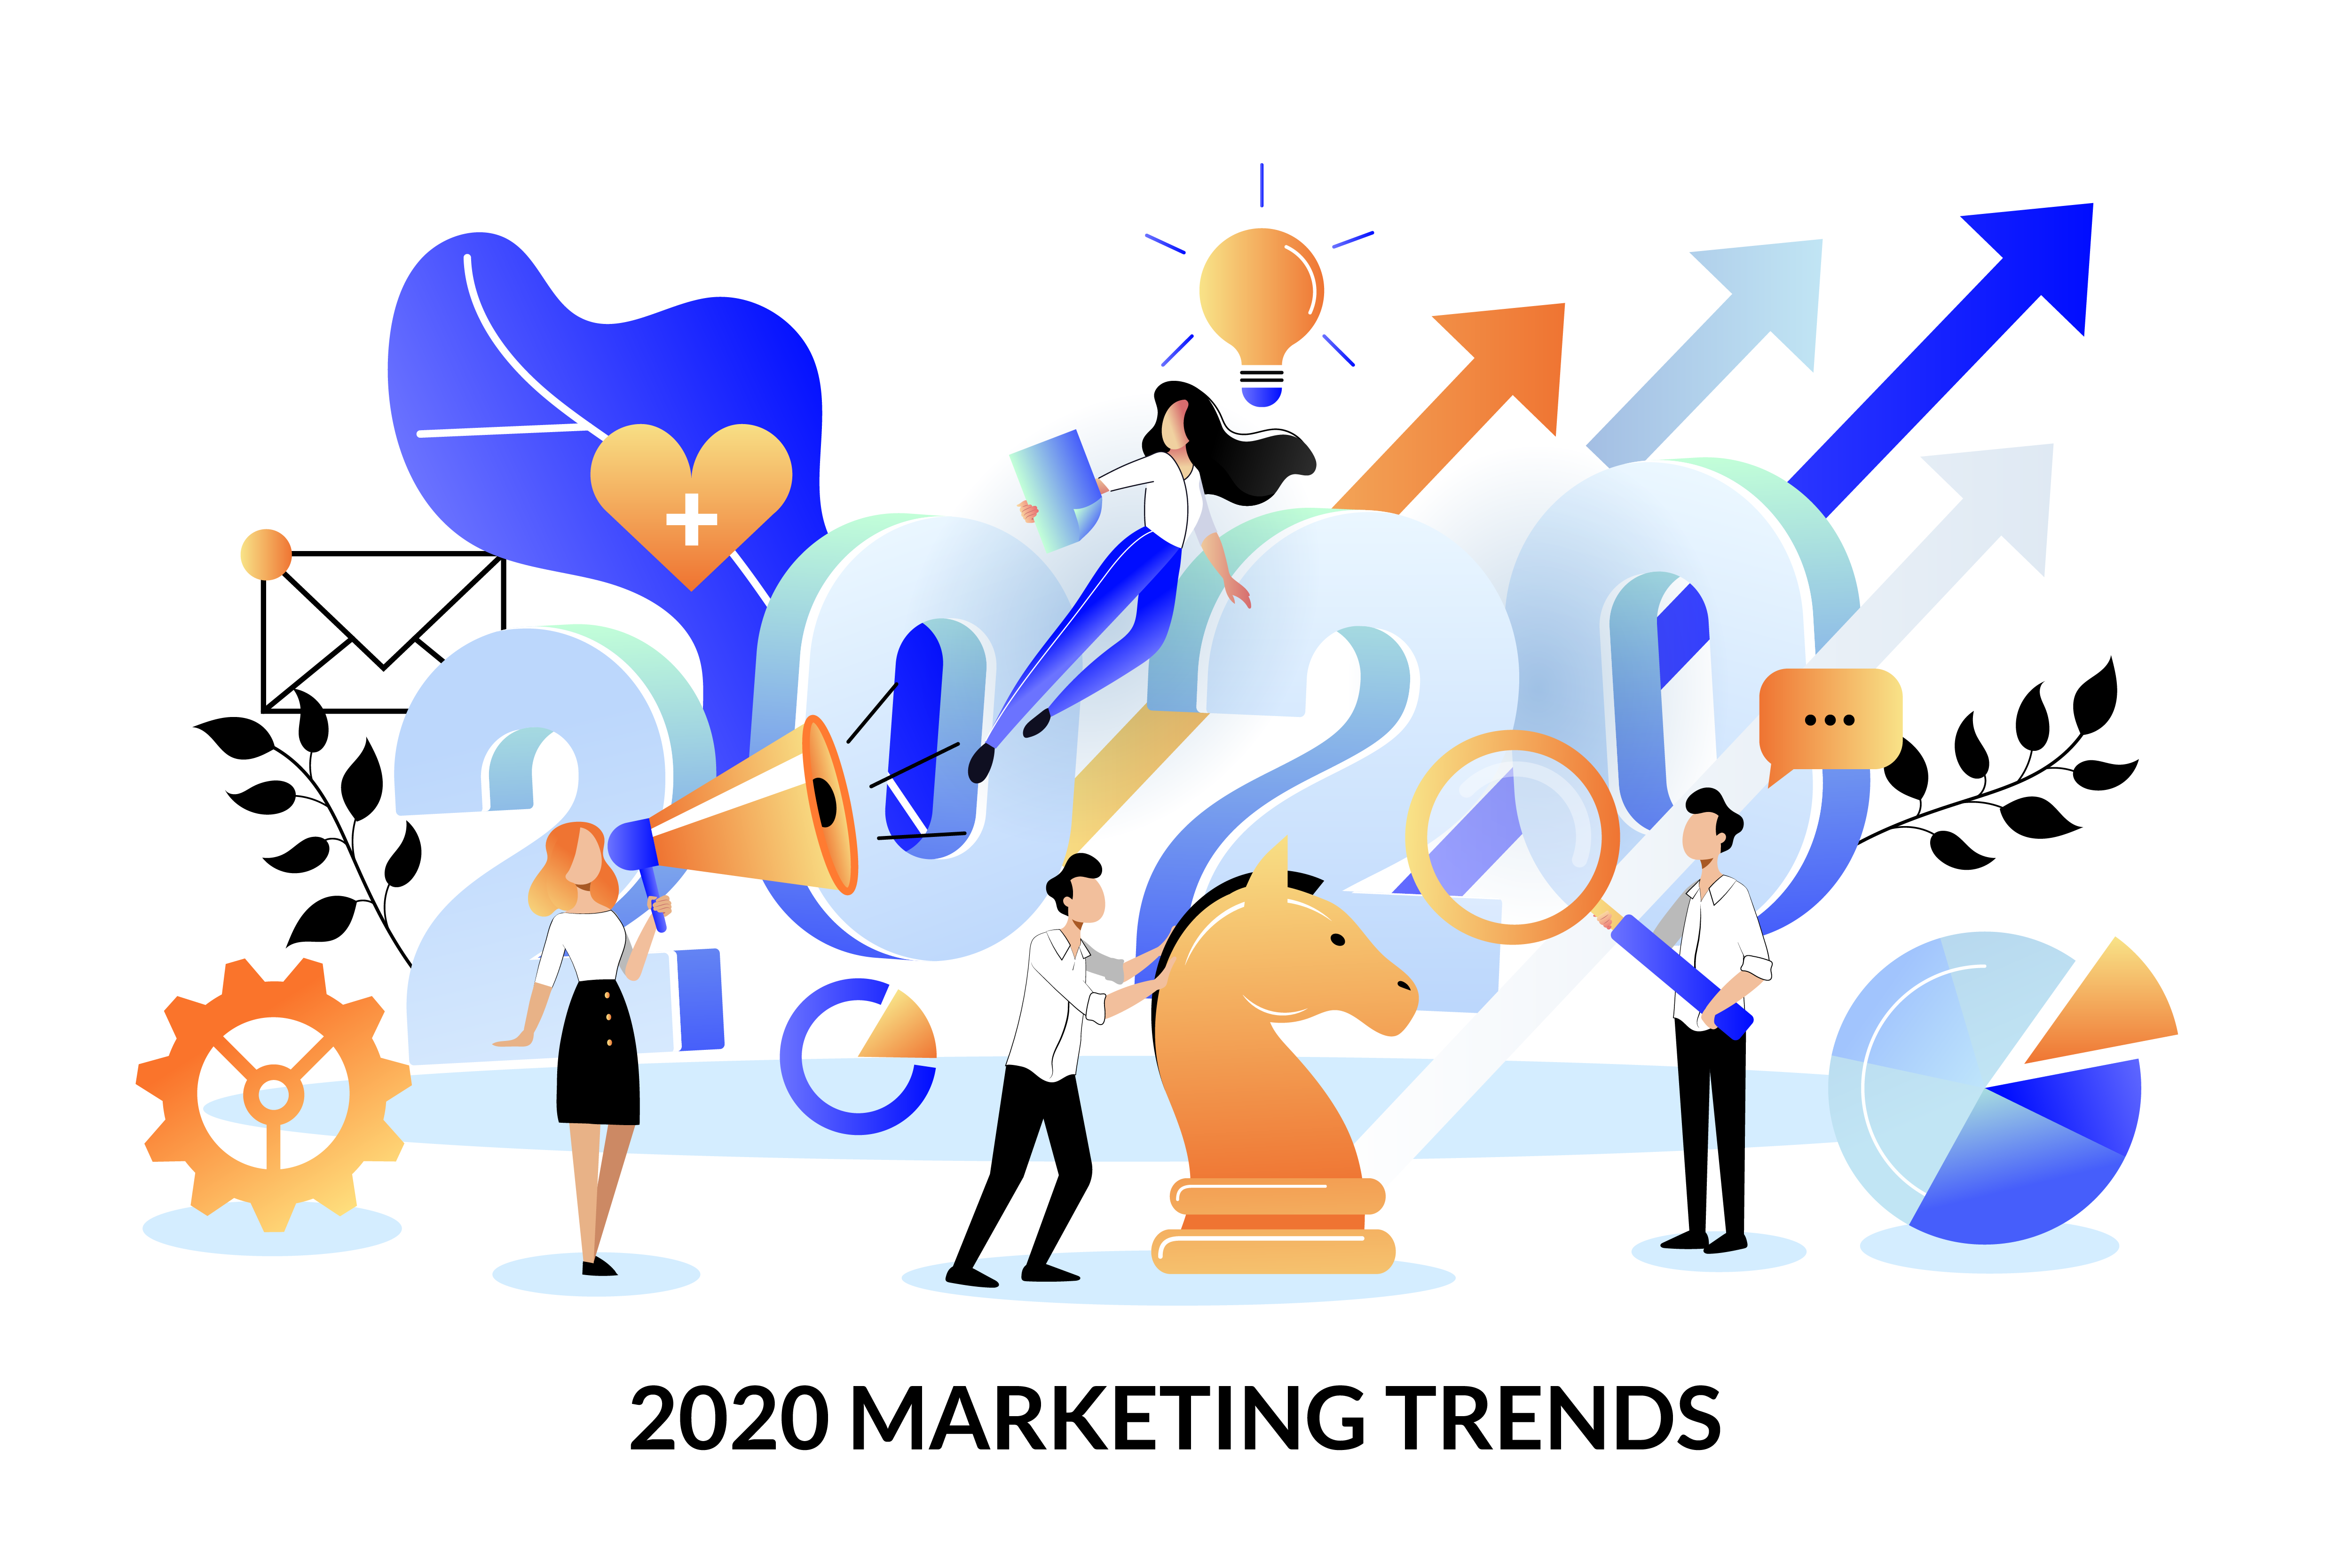 Content Marketing | 5 Trends You Shouldn’t Ignore in 2020